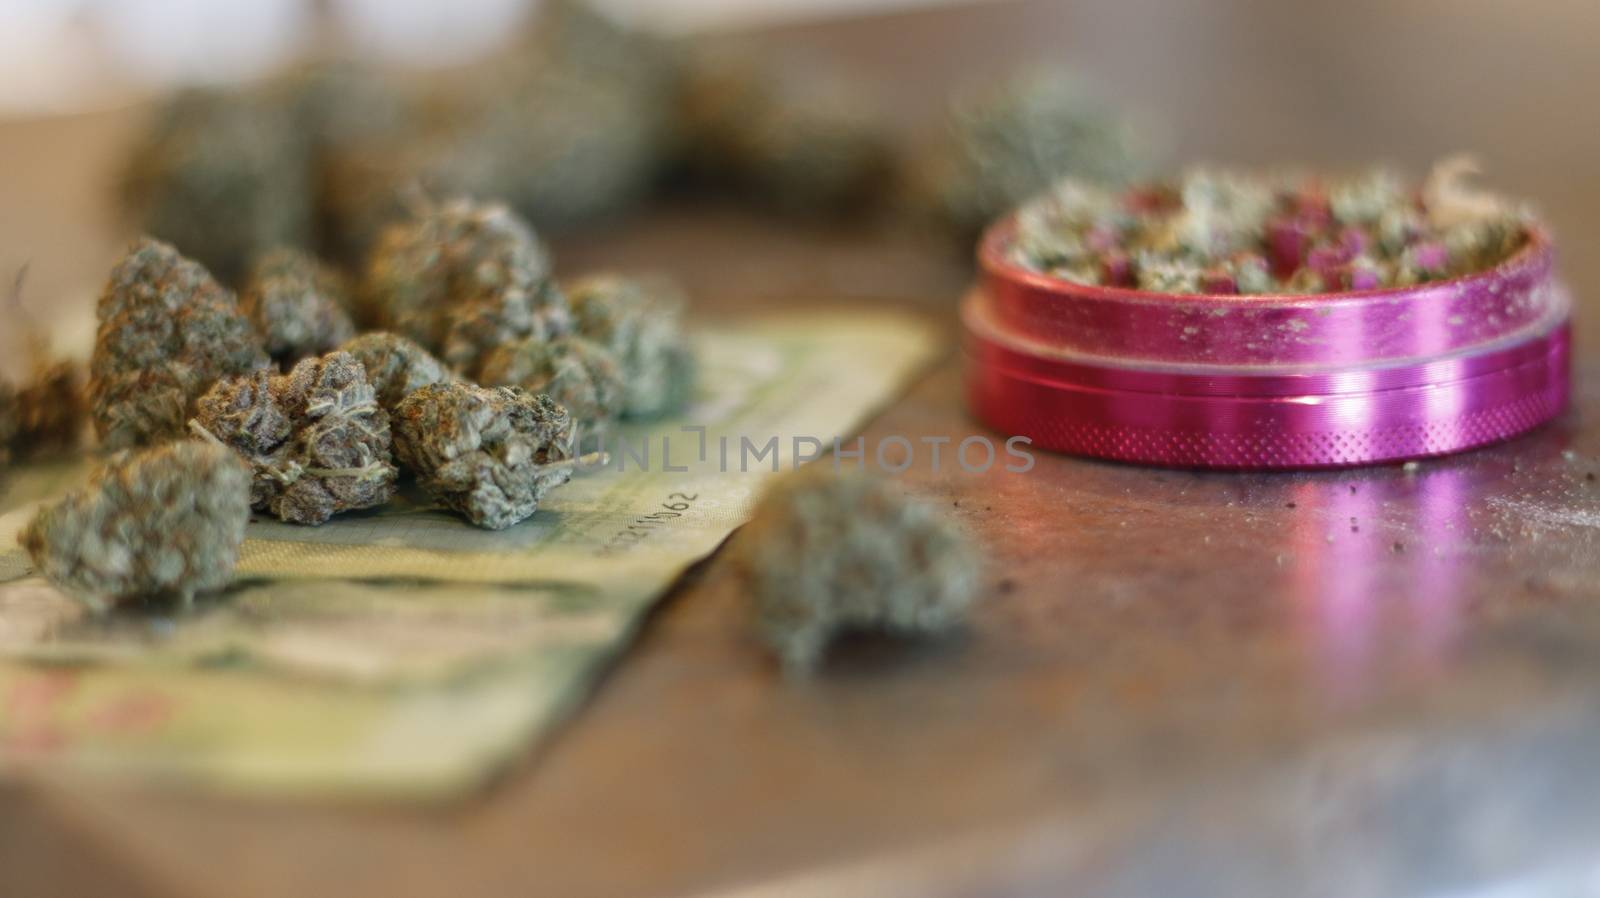 marijuana table top photography and themed. legal in canada. by mynewturtle1